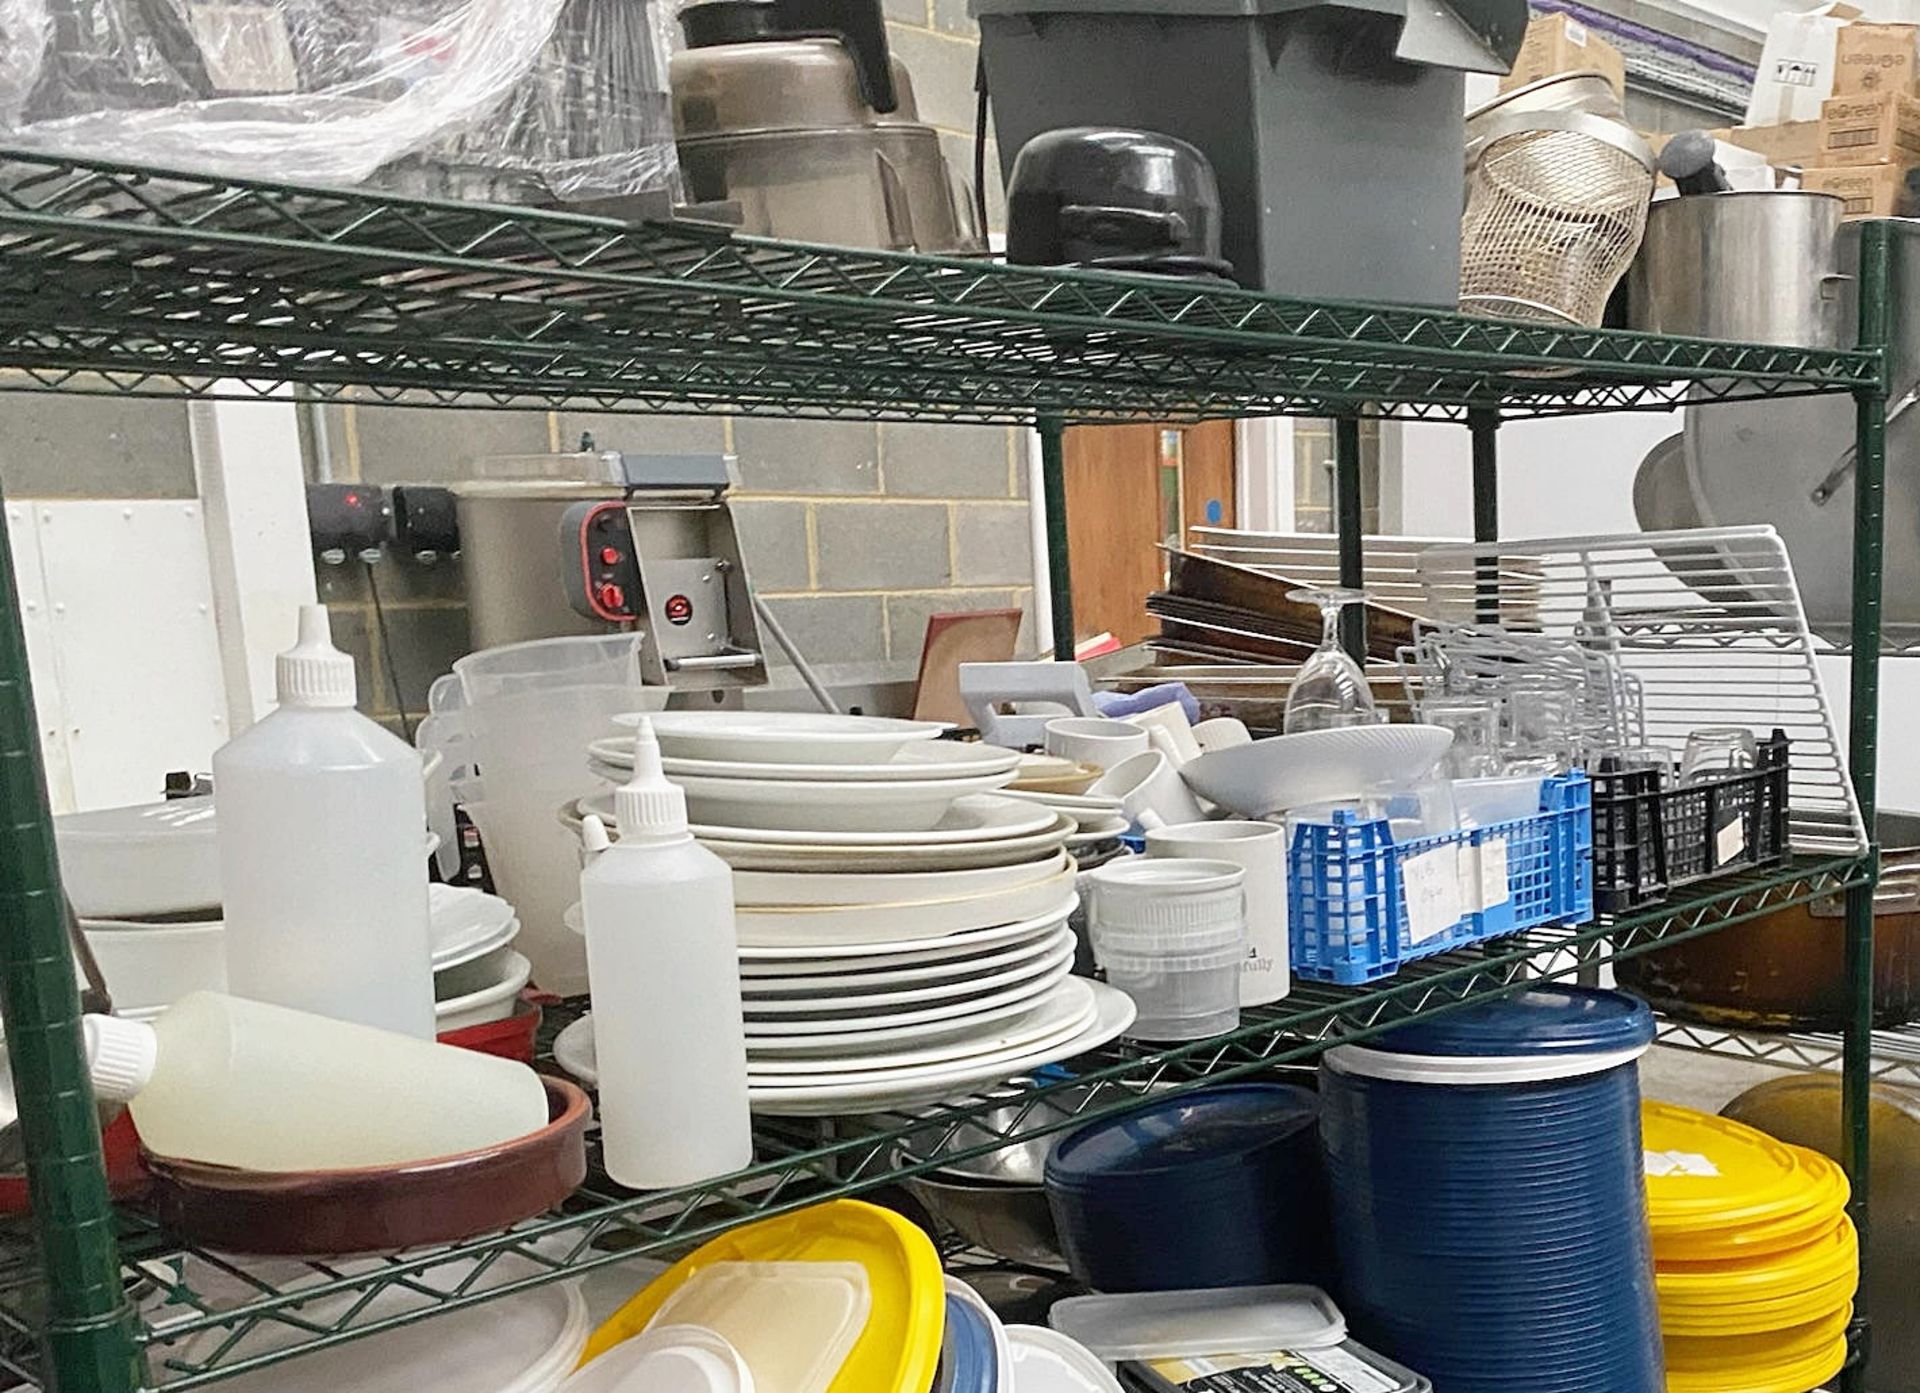 2 x Wire Storage Racks With a Large Quantity of Kitchen Utensils and Accessories - Image 2 of 4